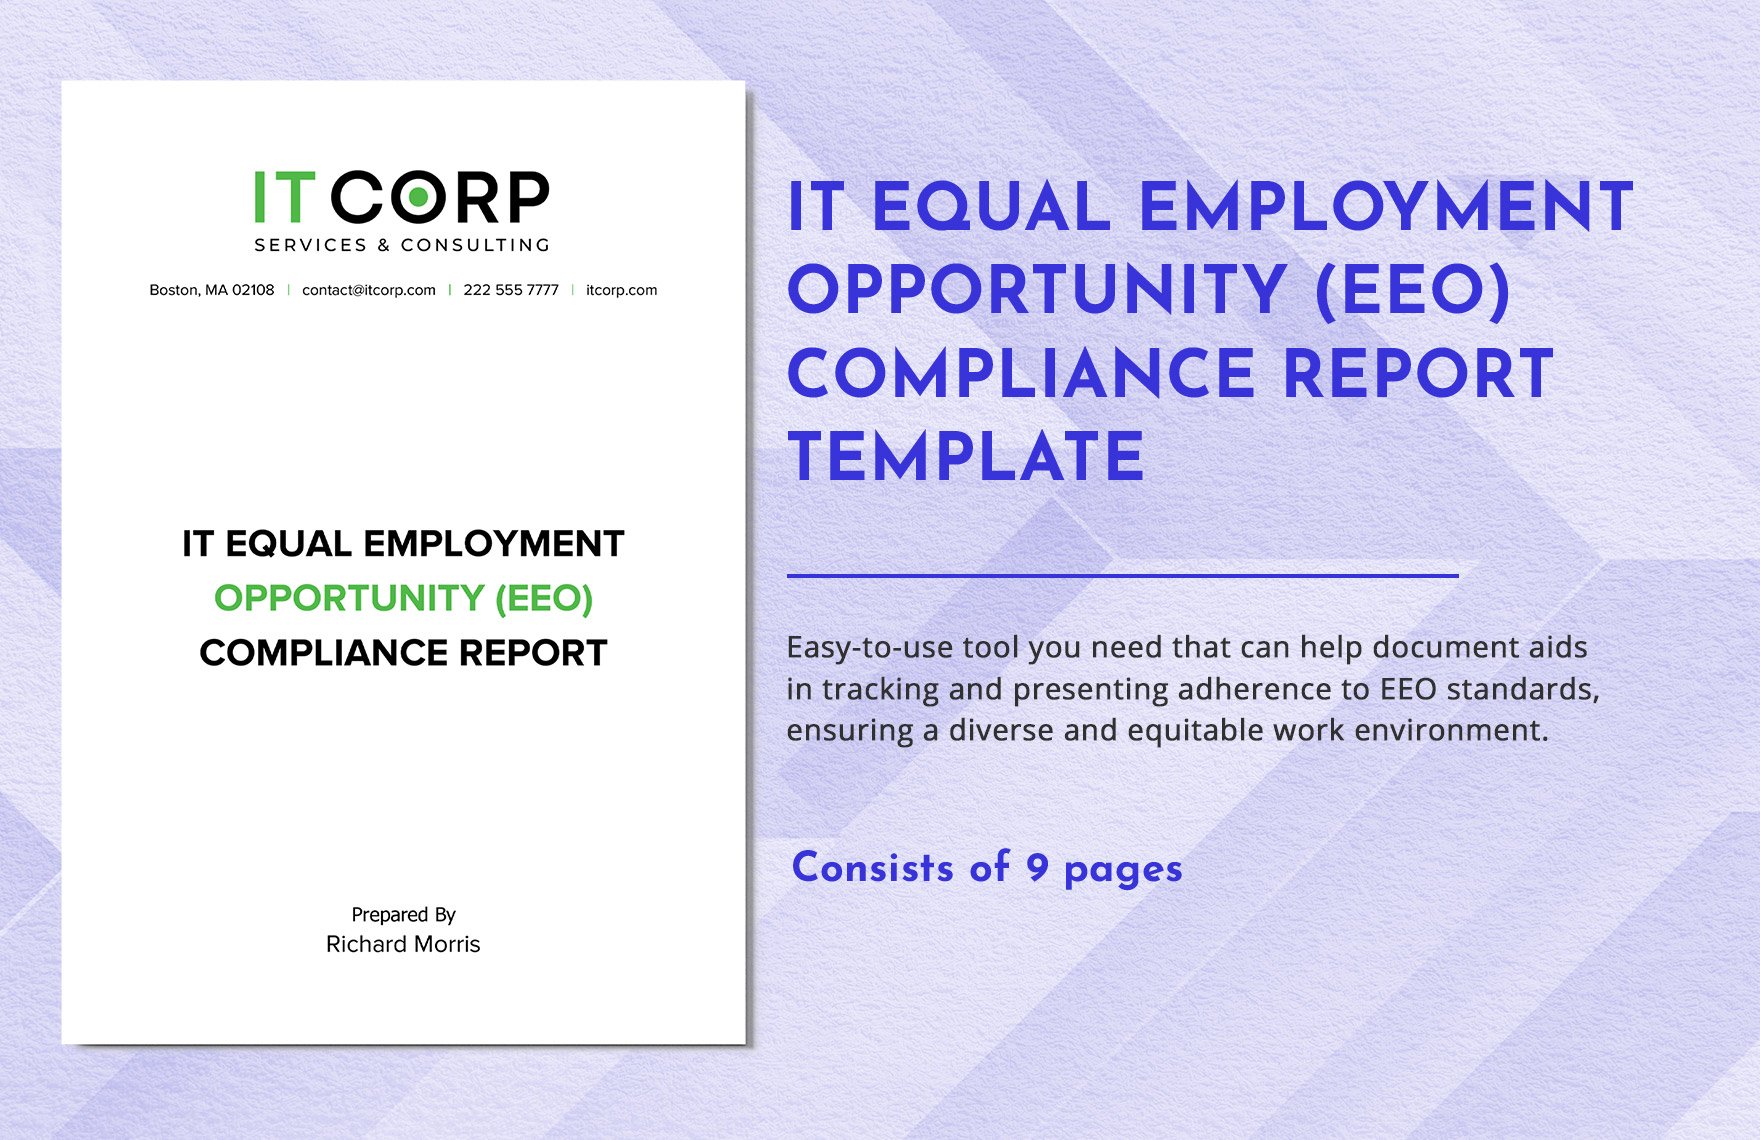 IT Equal Employment Opportunity (EEO) Compliance Report Template in Word, Google Docs, PDF